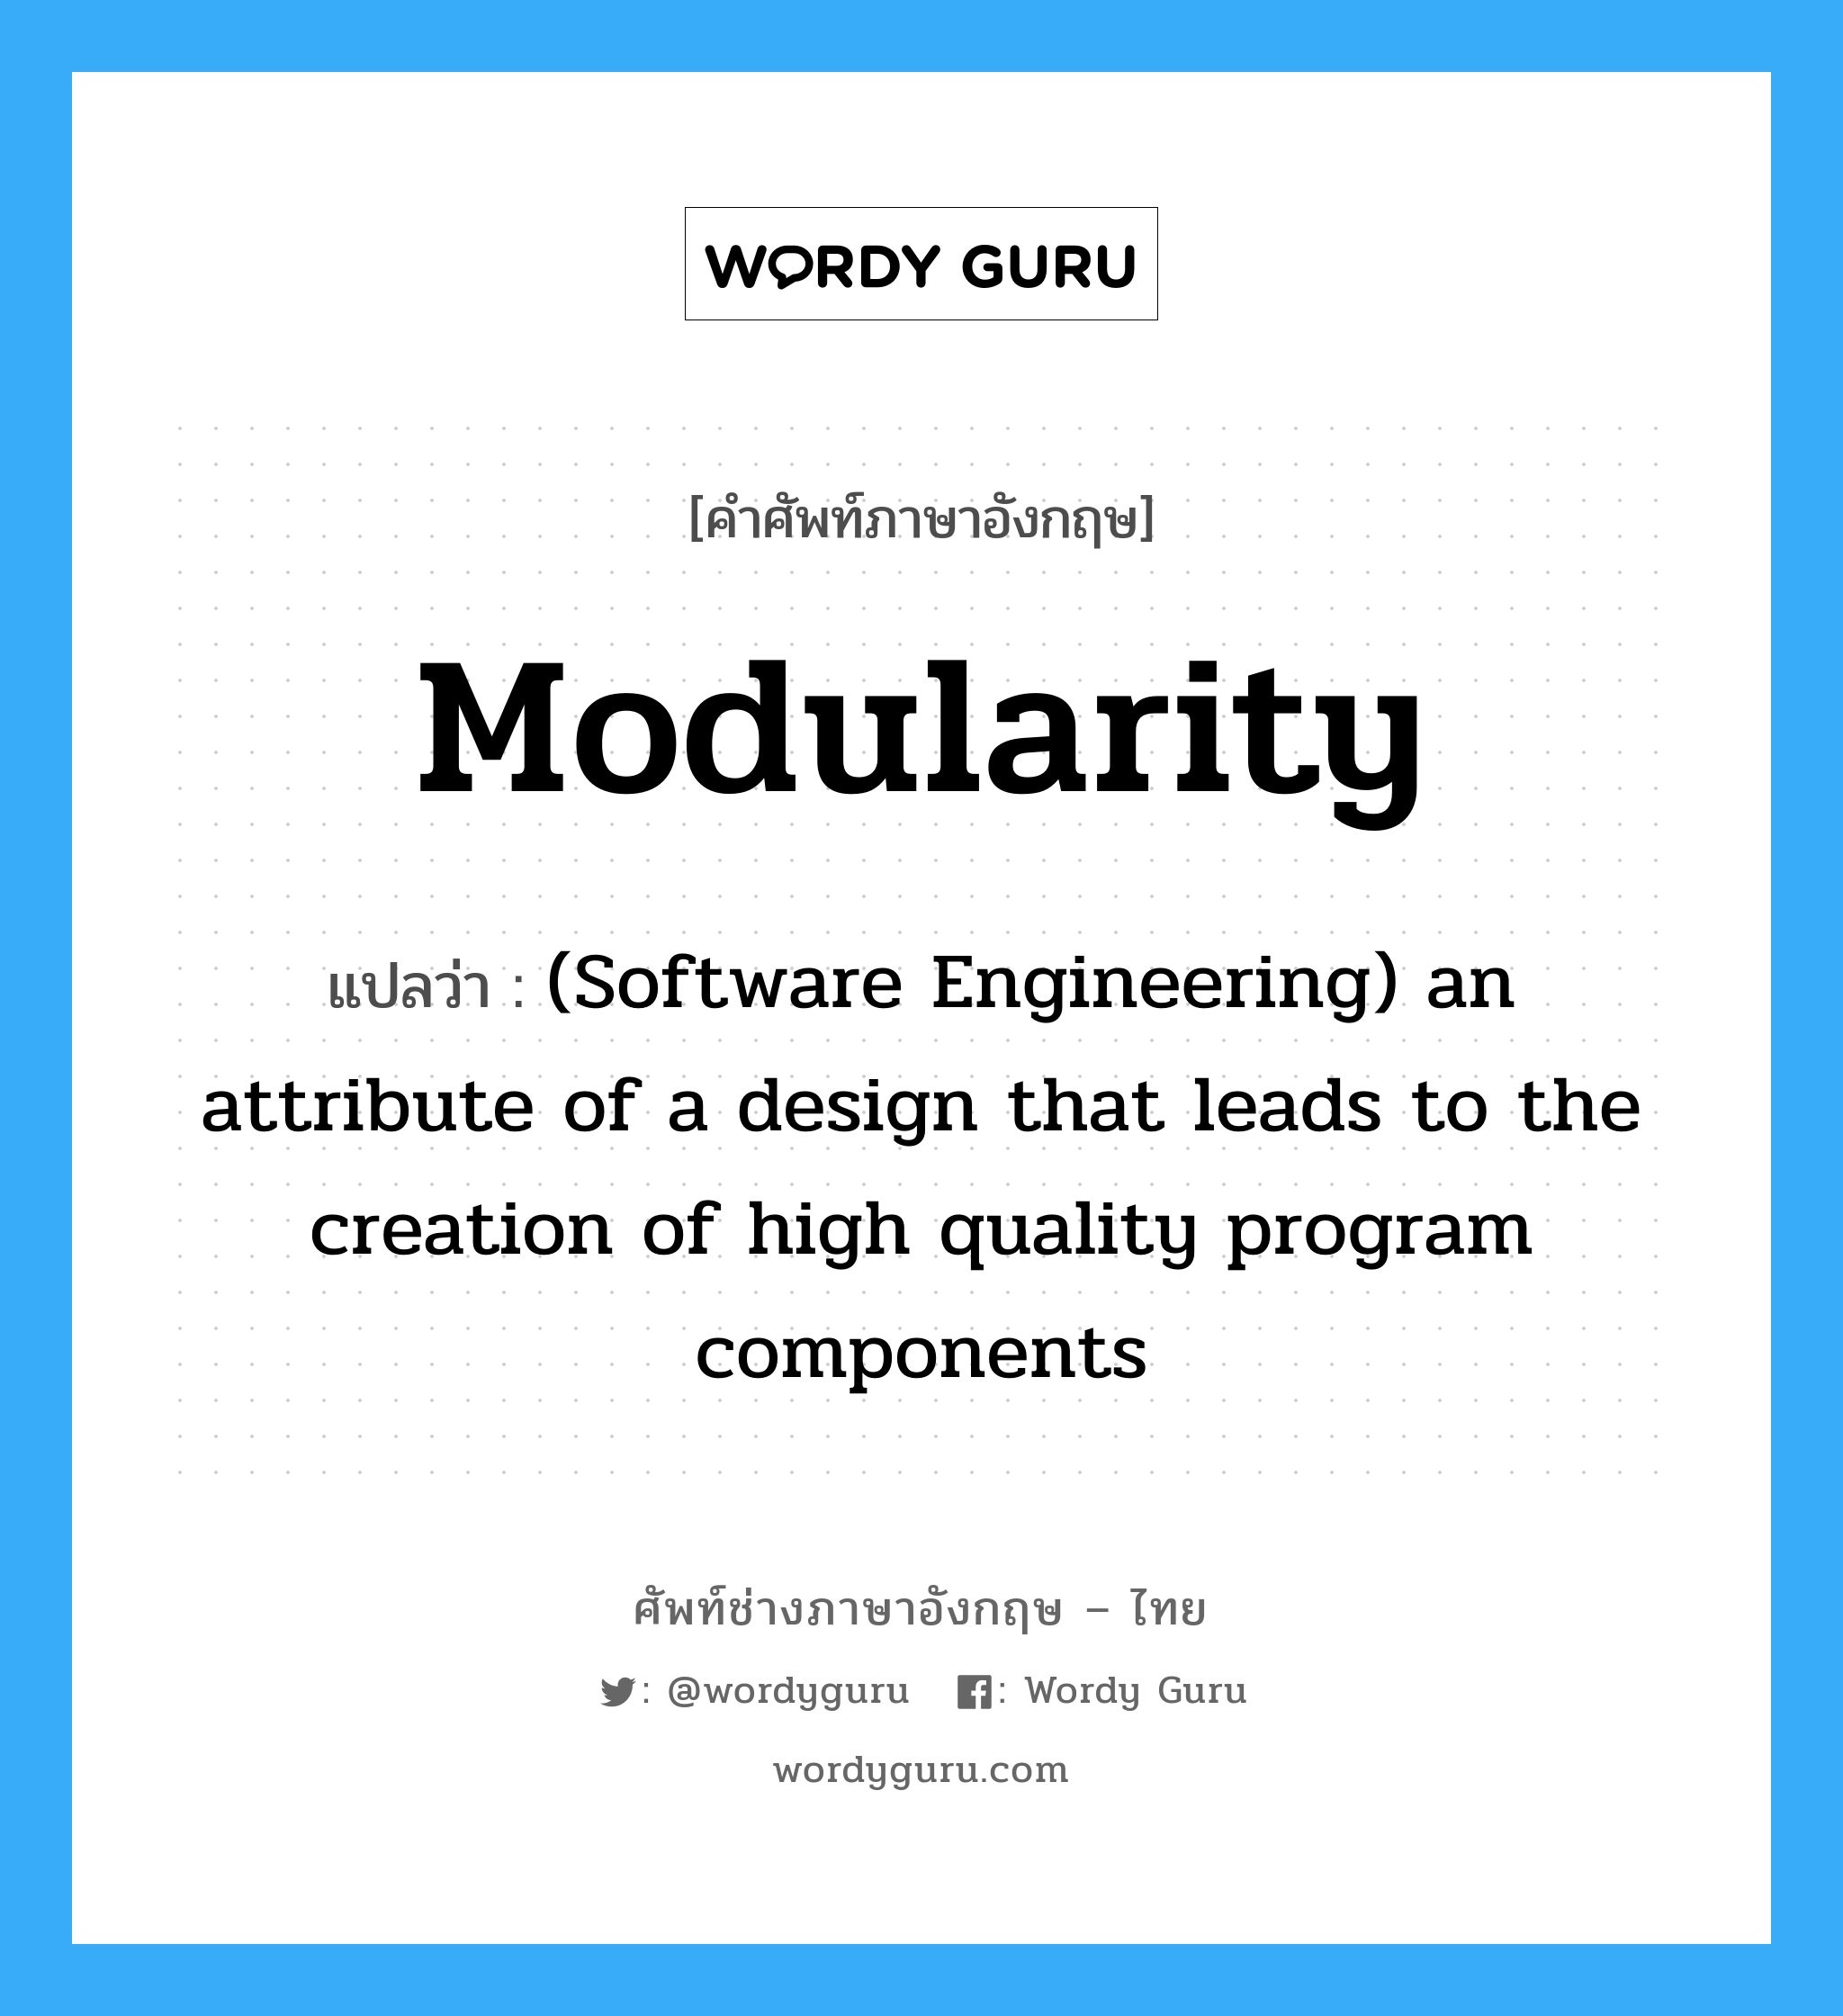 (Software Engineering) an attribute of a design that leads to the creation of high quality program components ภาษาอังกฤษ?, คำศัพท์ช่างภาษาอังกฤษ - ไทย (Software Engineering) an attribute of a design that leads to the creation of high quality program components คำศัพท์ภาษาอังกฤษ (Software Engineering) an attribute of a design that leads to the creation of high quality program components แปลว่า Modularity